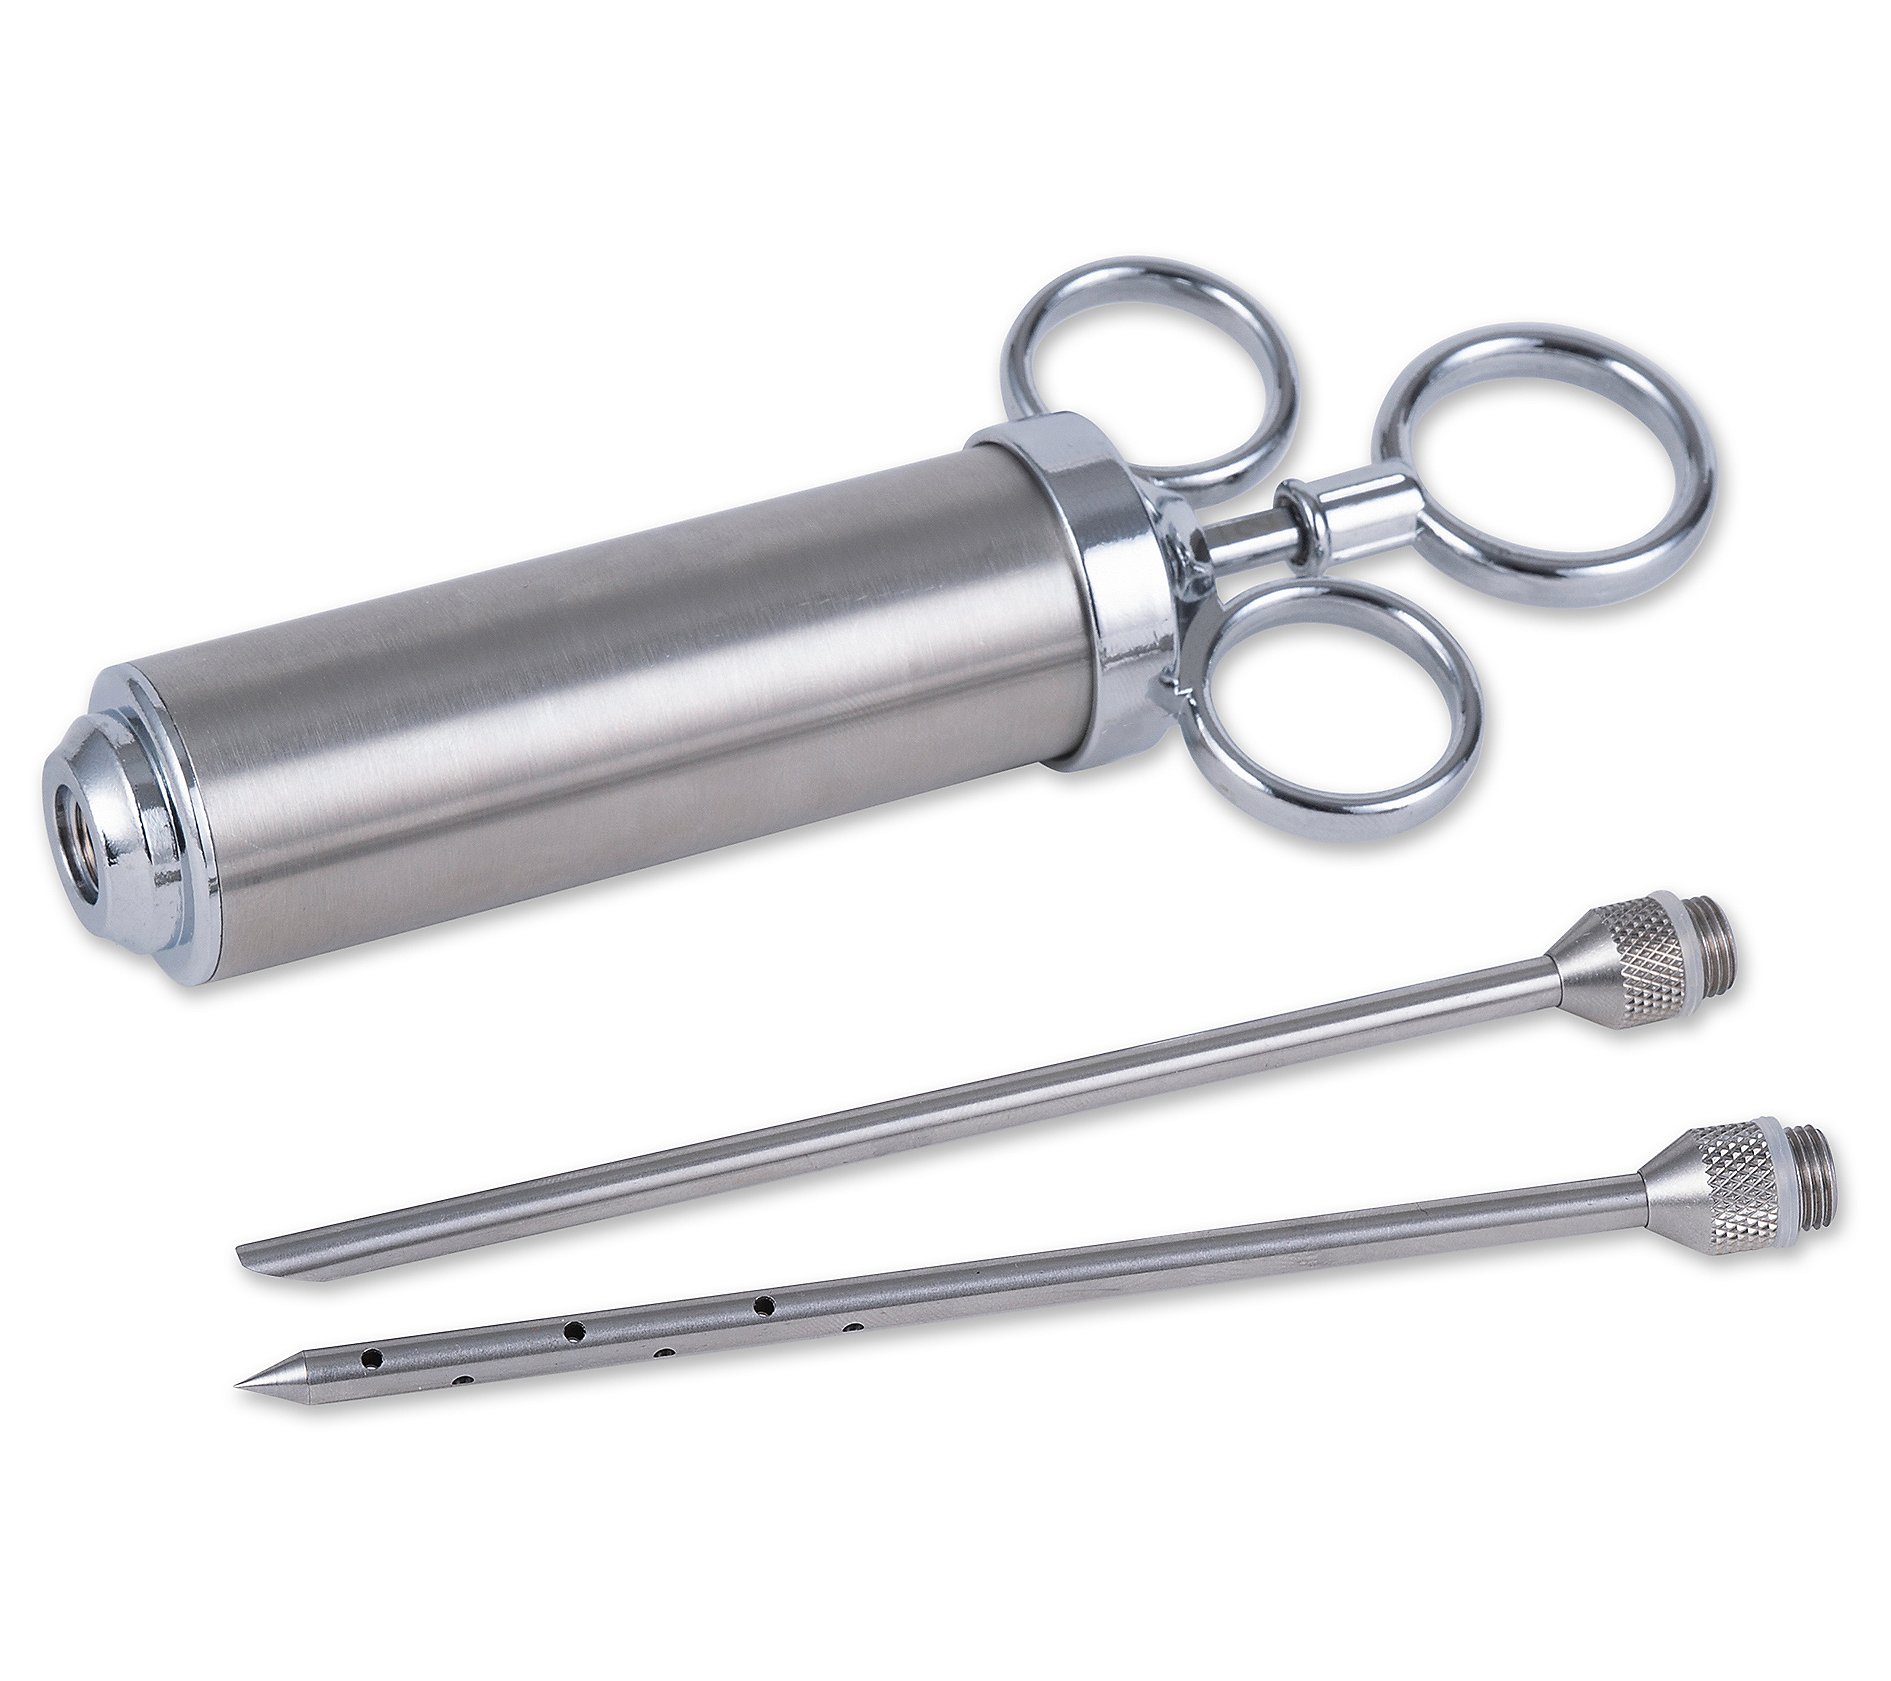 RSVP Stainless Steel Marinade Injector Set